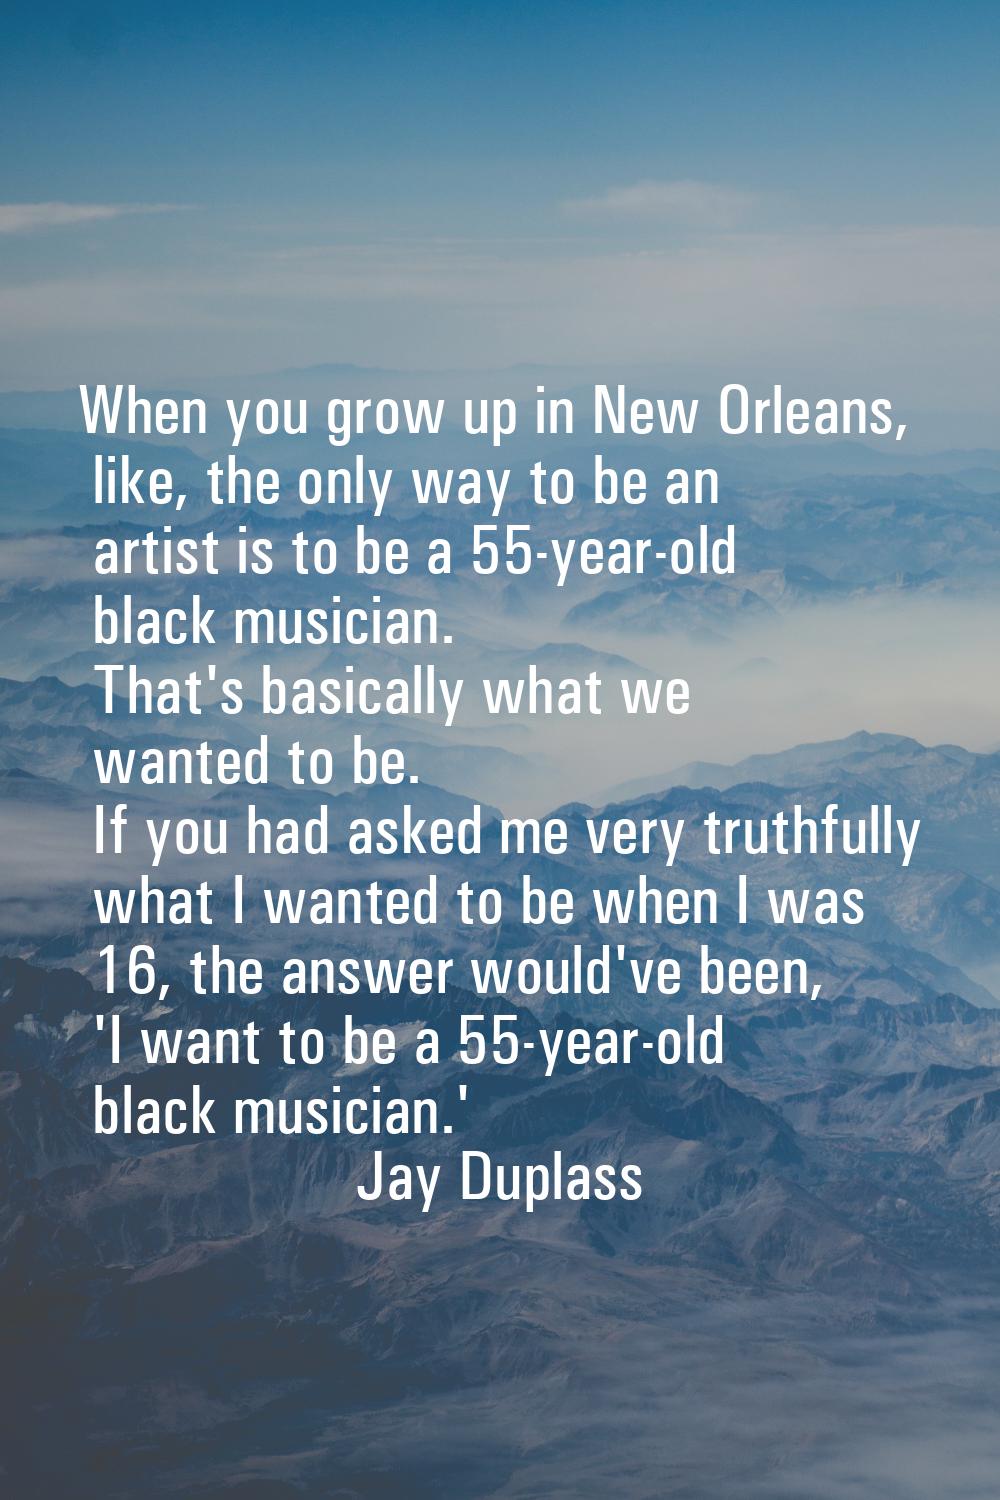 When you grow up in New Orleans, like, the only way to be an artist is to be a 55-year-old black mu